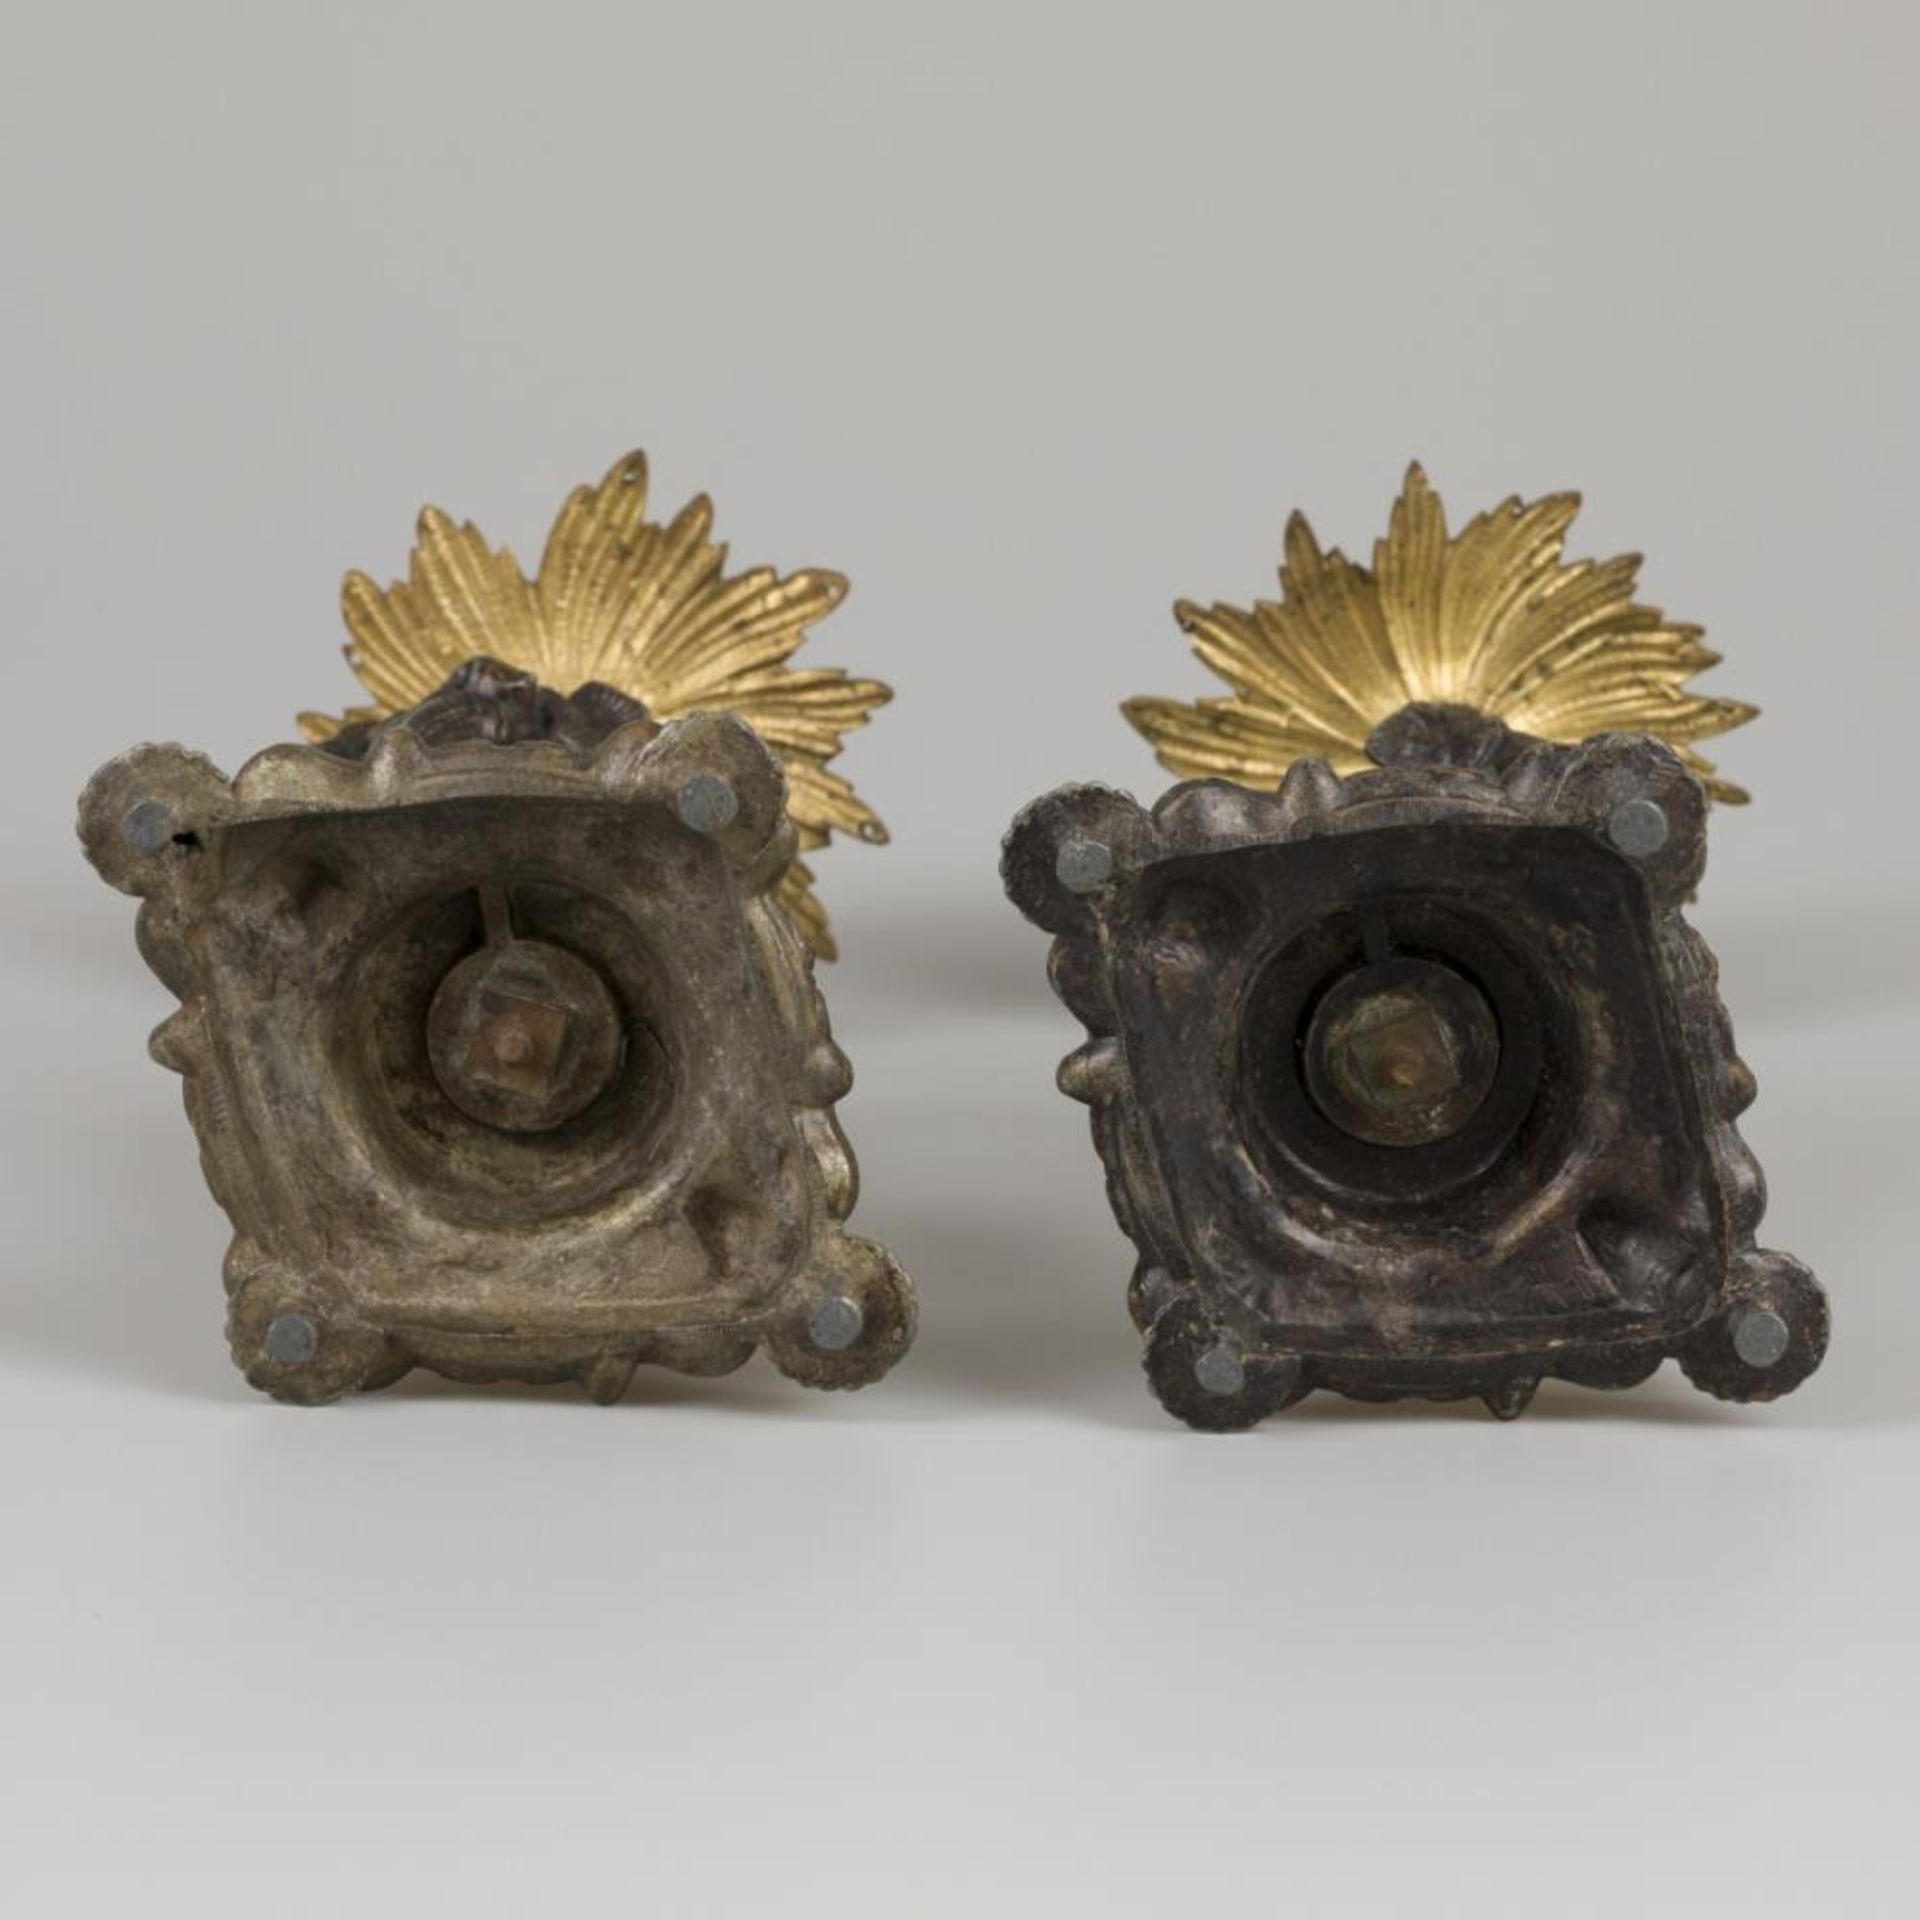 A set of (2) bronze candles, France, late 19th century. - Image 5 of 5